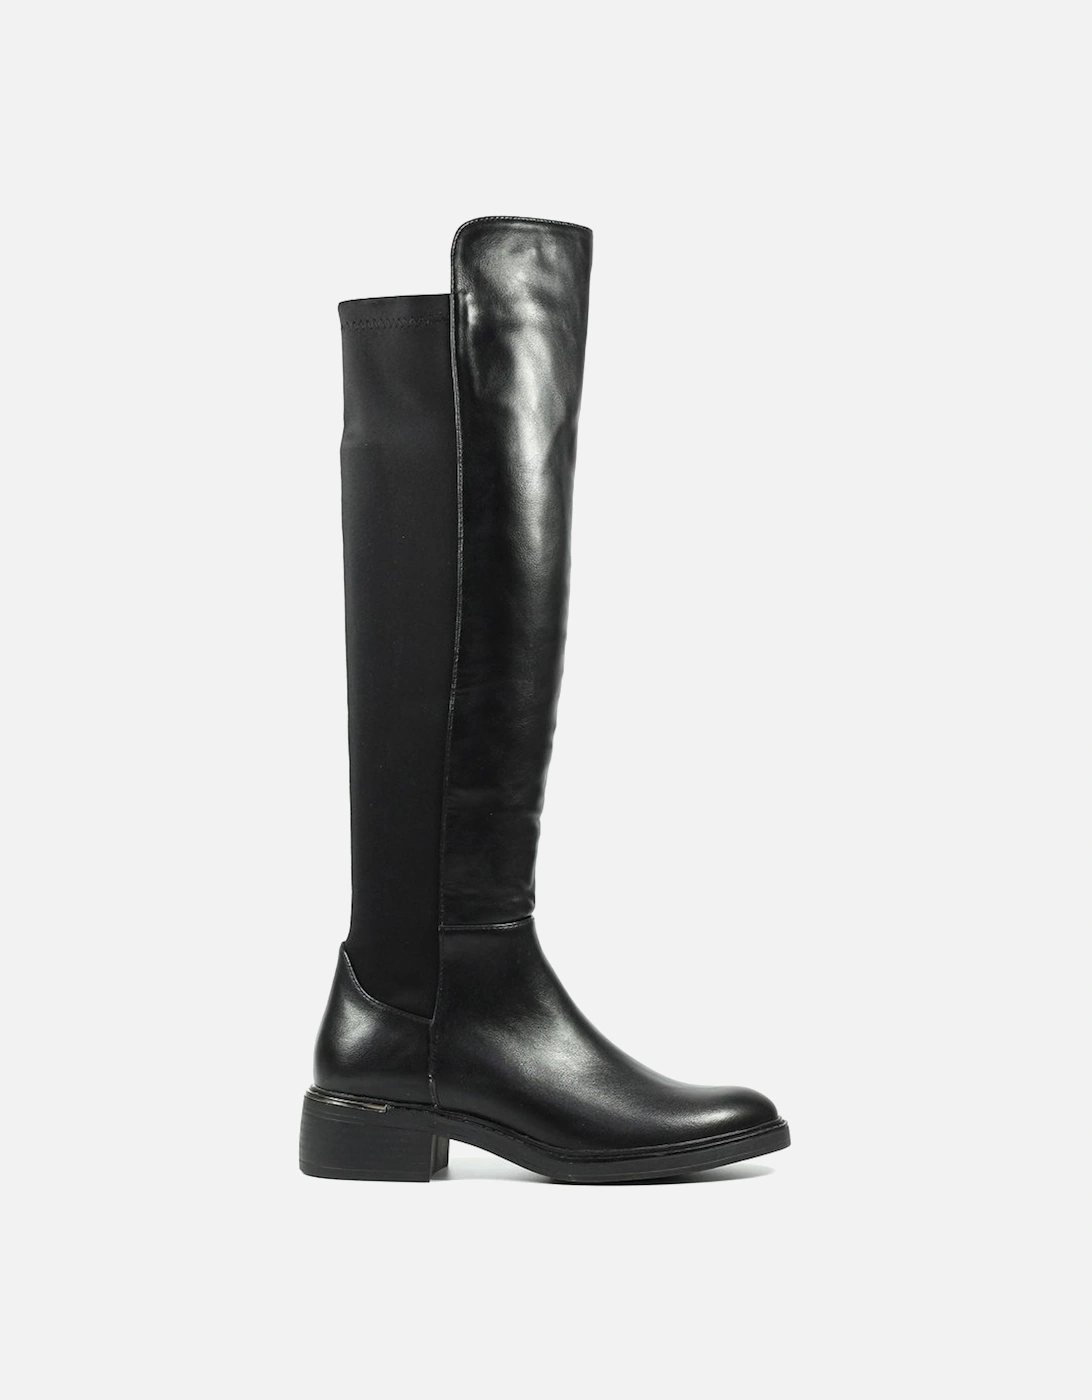 Fremont Womens Knee High Boots